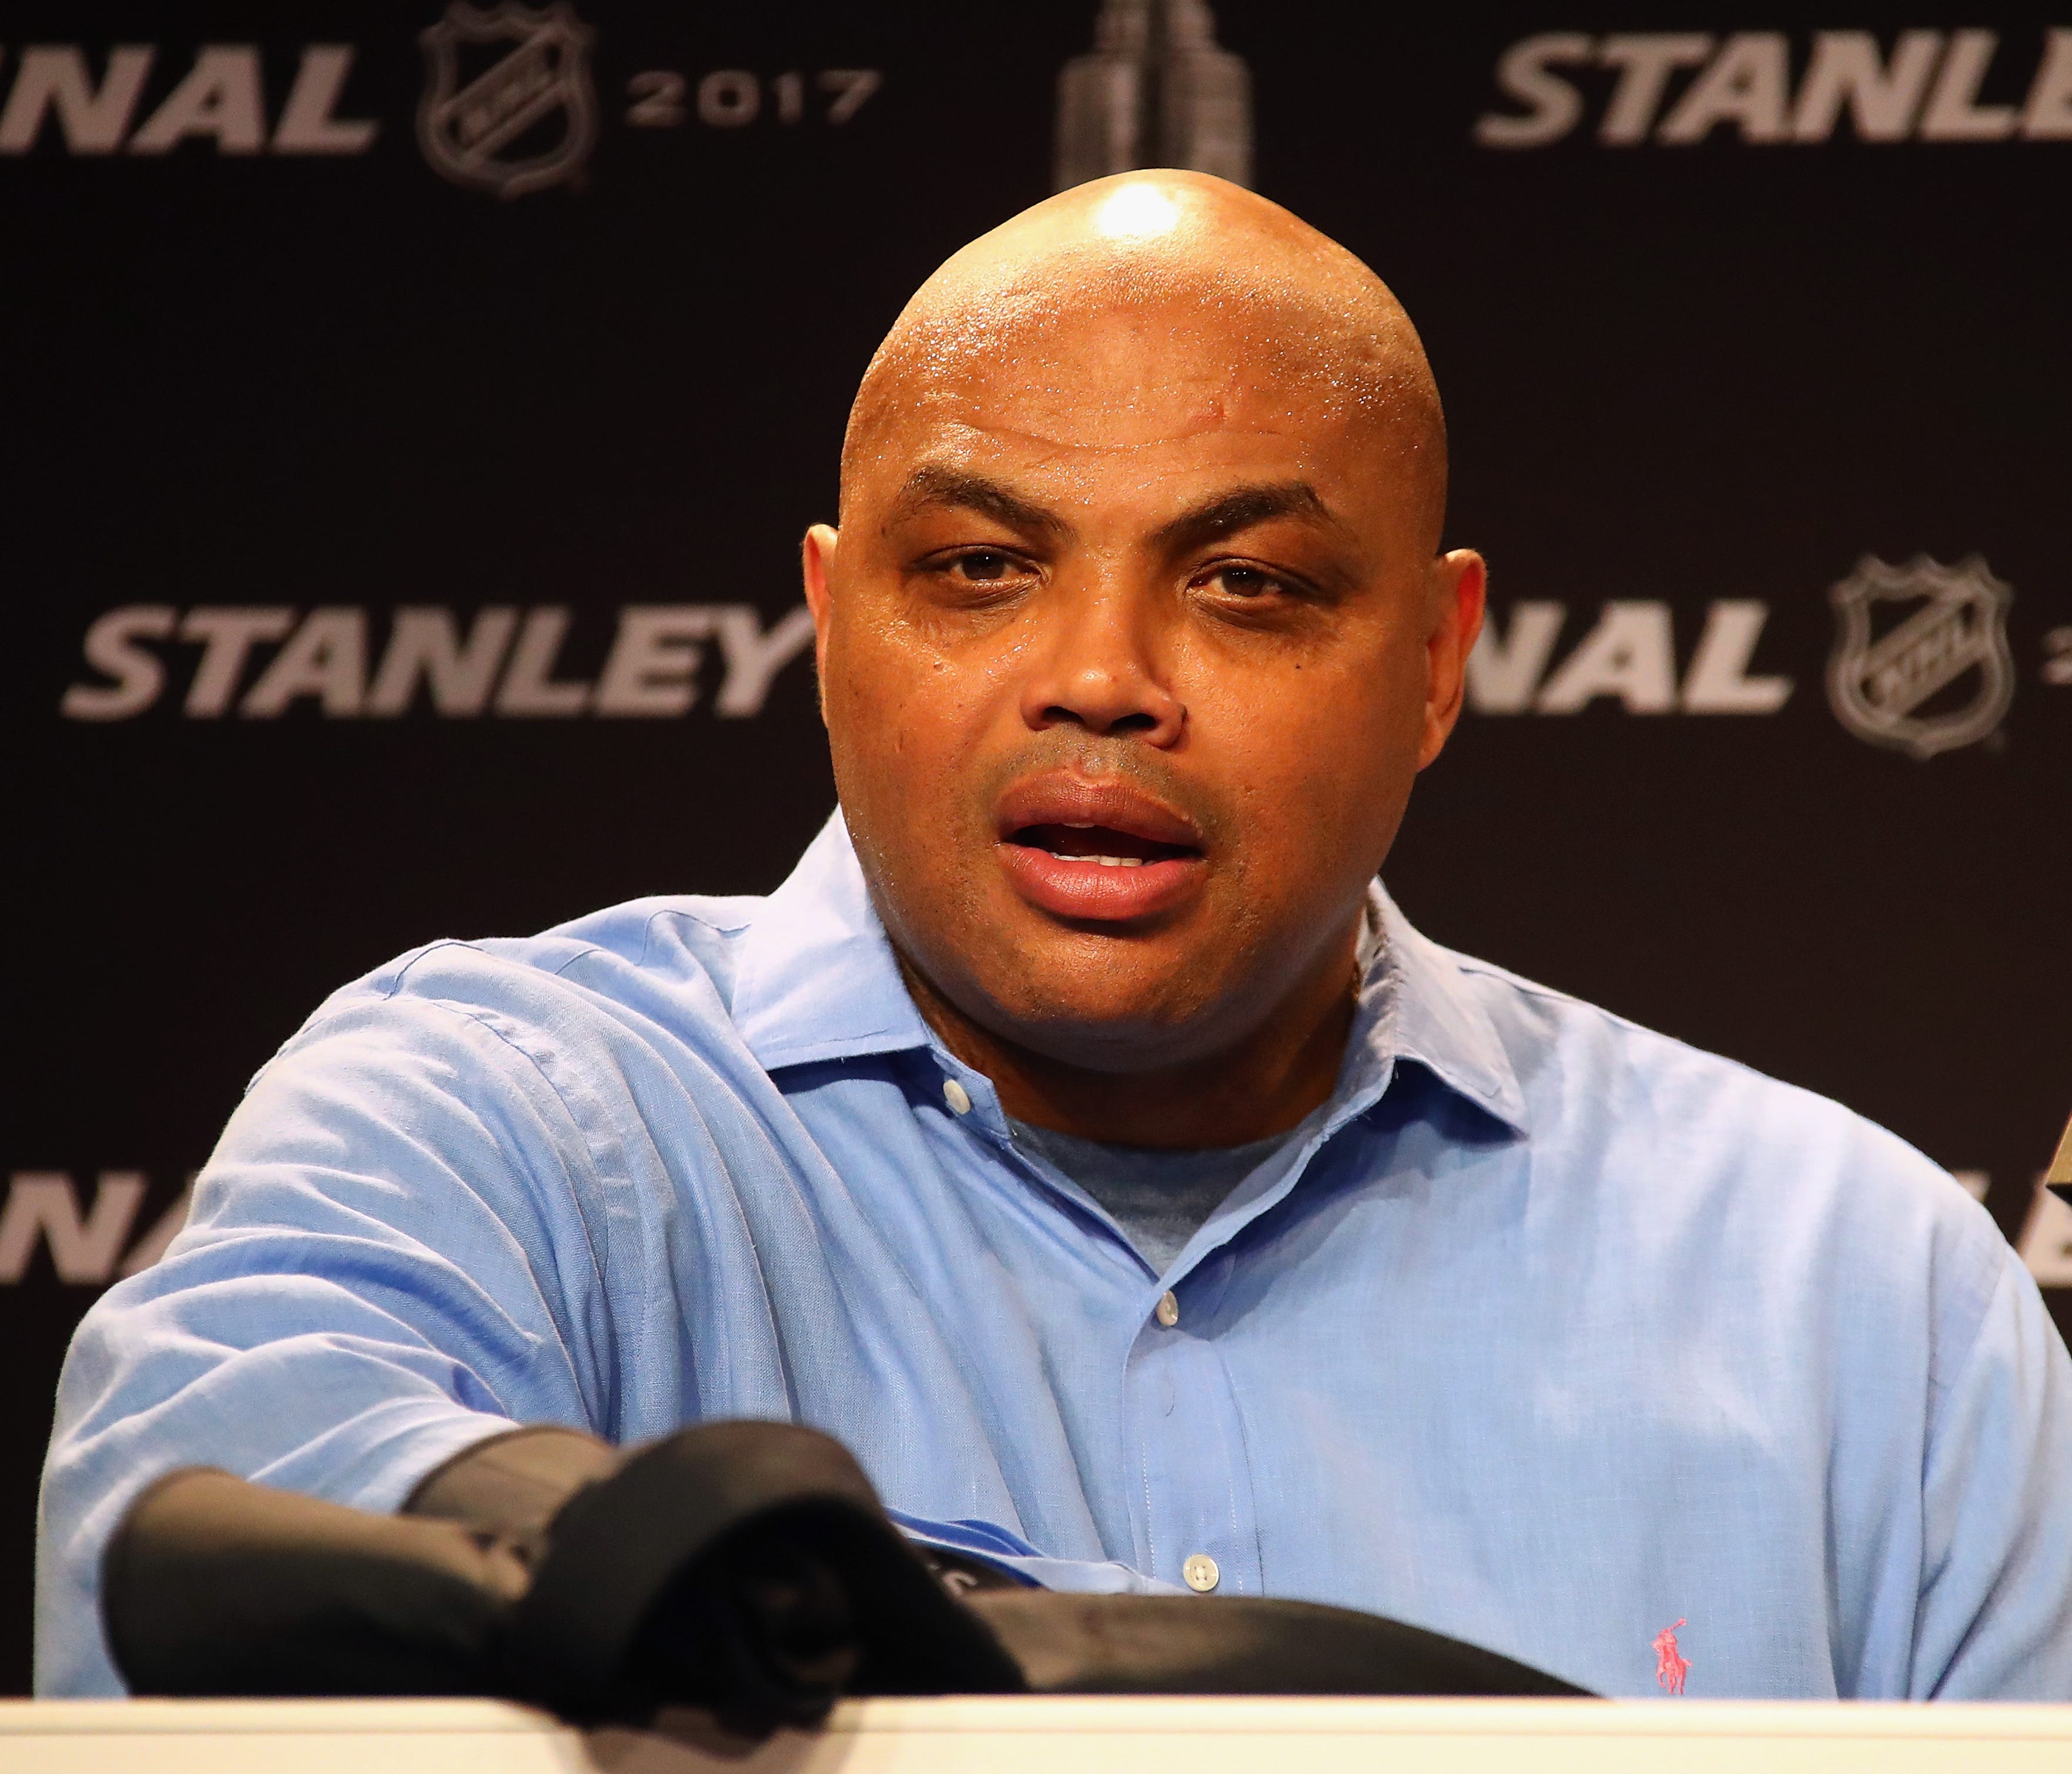 NASHVILLE, TN - JUNE 05:  Former NBA player Charles Barkley speaks during a press conference prior to Game Four of the 2017 NHL Stanley Cup Final between the Pittsburgh Penguins and the Nashville Predators at the Bridgestone Arena on June 5, 2017 in 